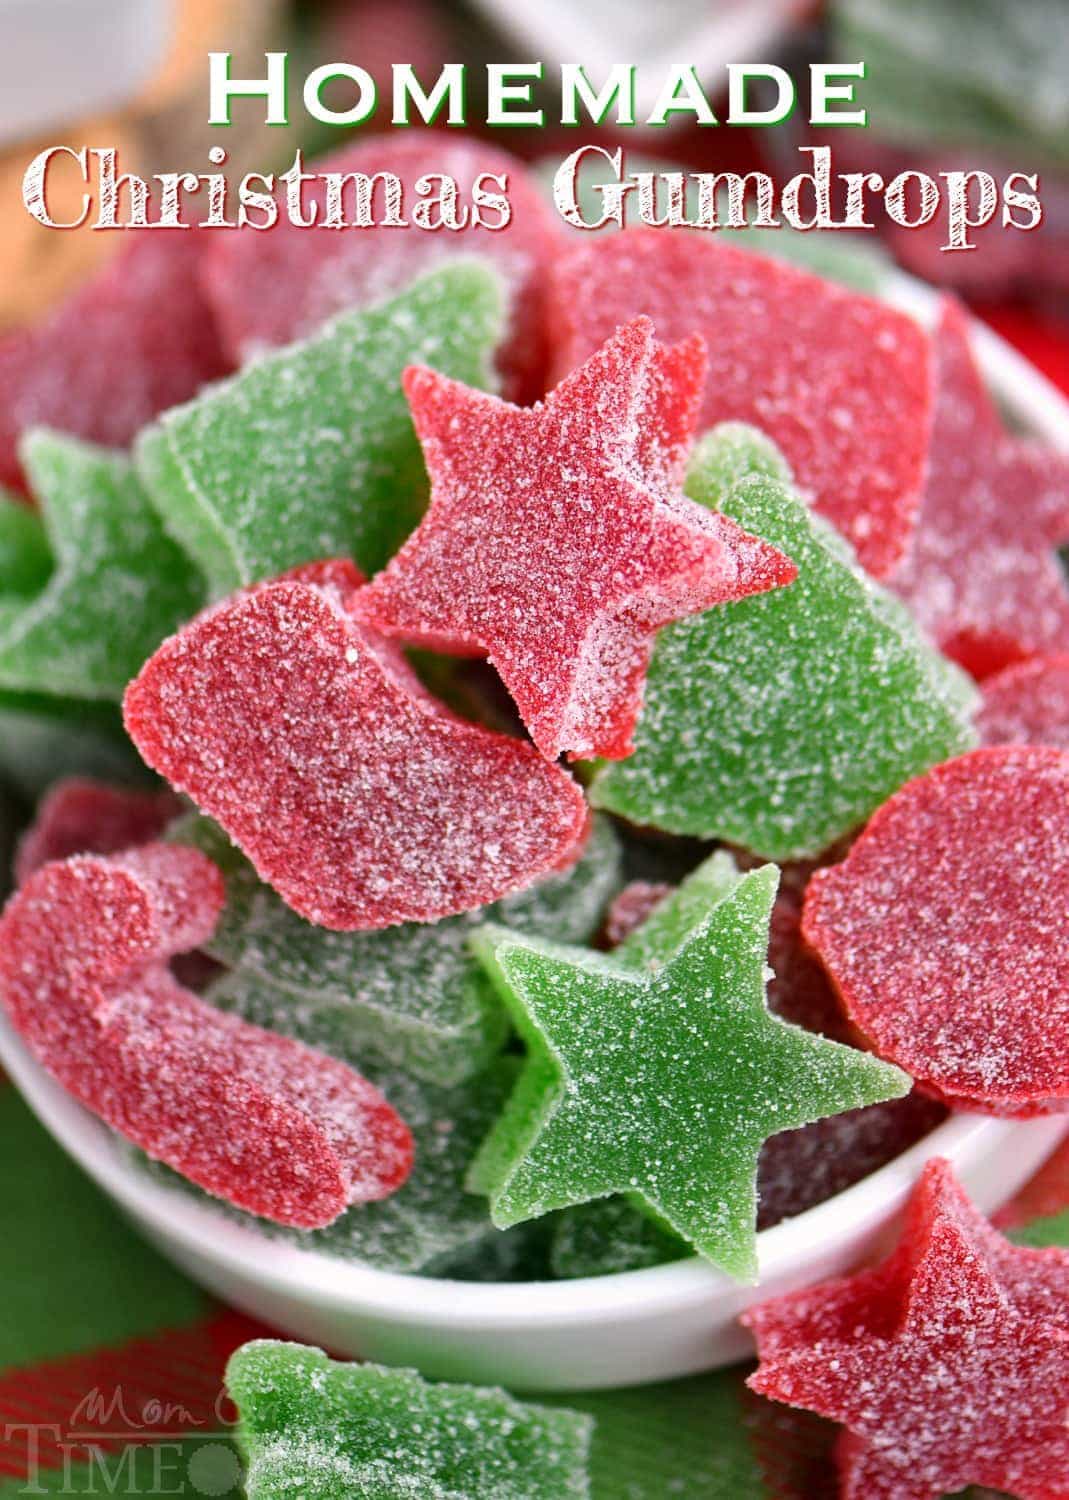 12-more-delicious-christmas-candies-to-make-random-acts-of-baking